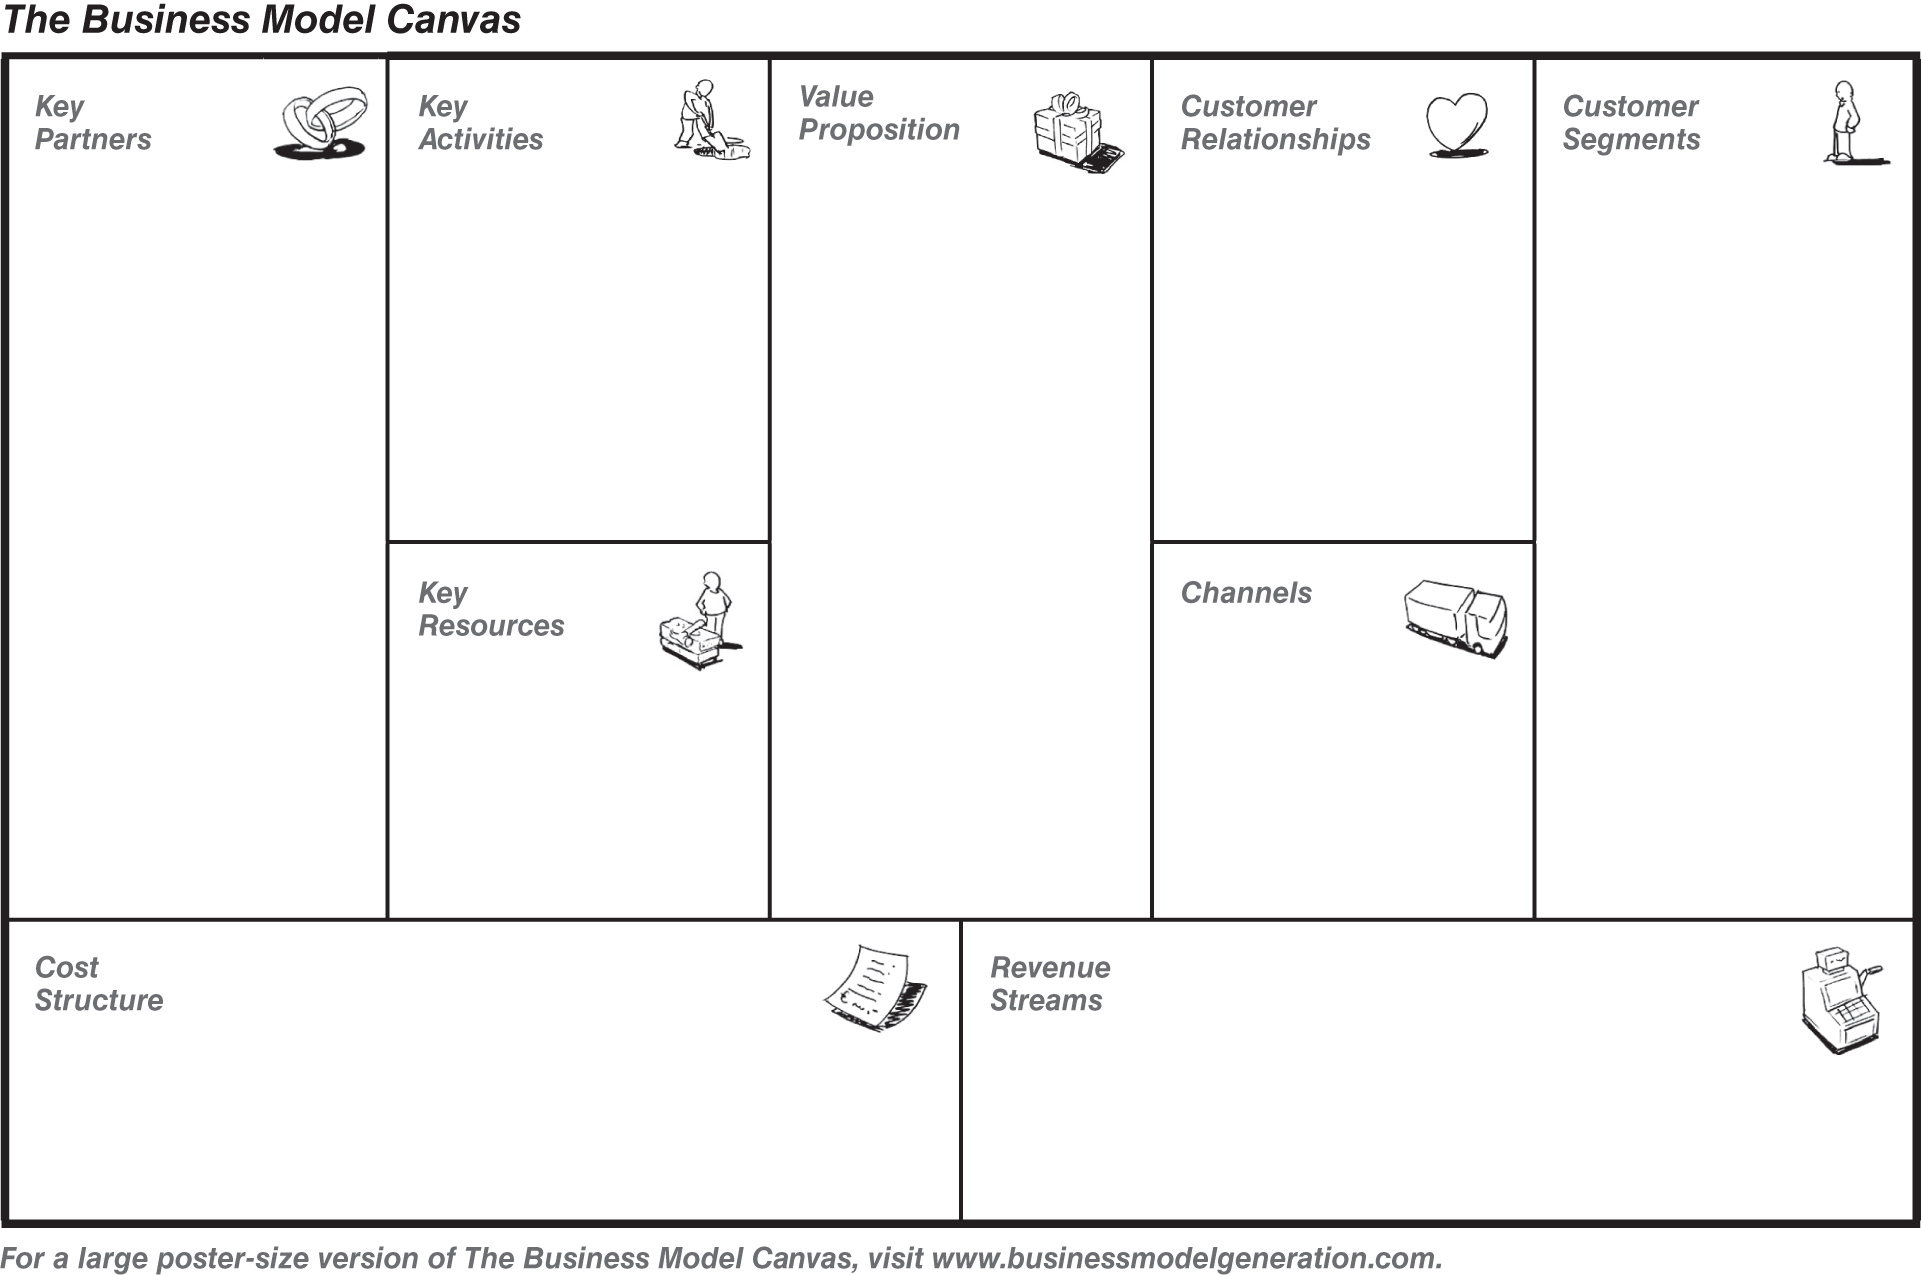 Schematic illustration of the Business Model Canvas